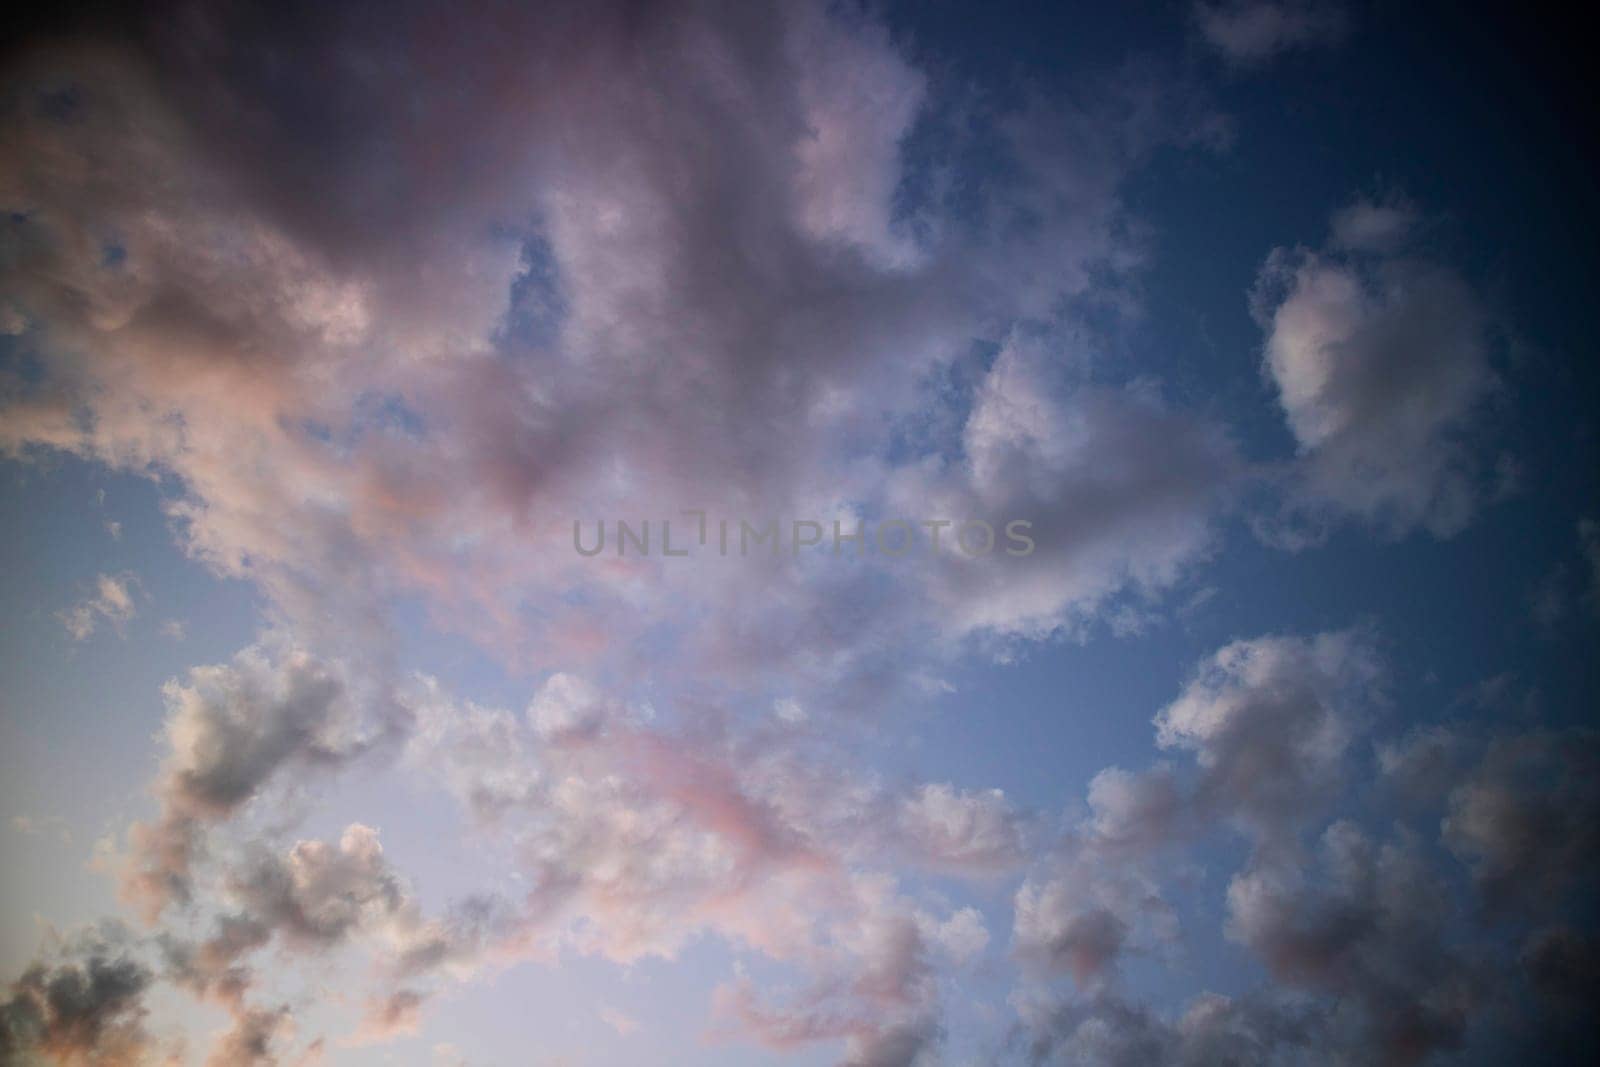 Photographic documentation of clouds at sunset  by fotografiche.eu